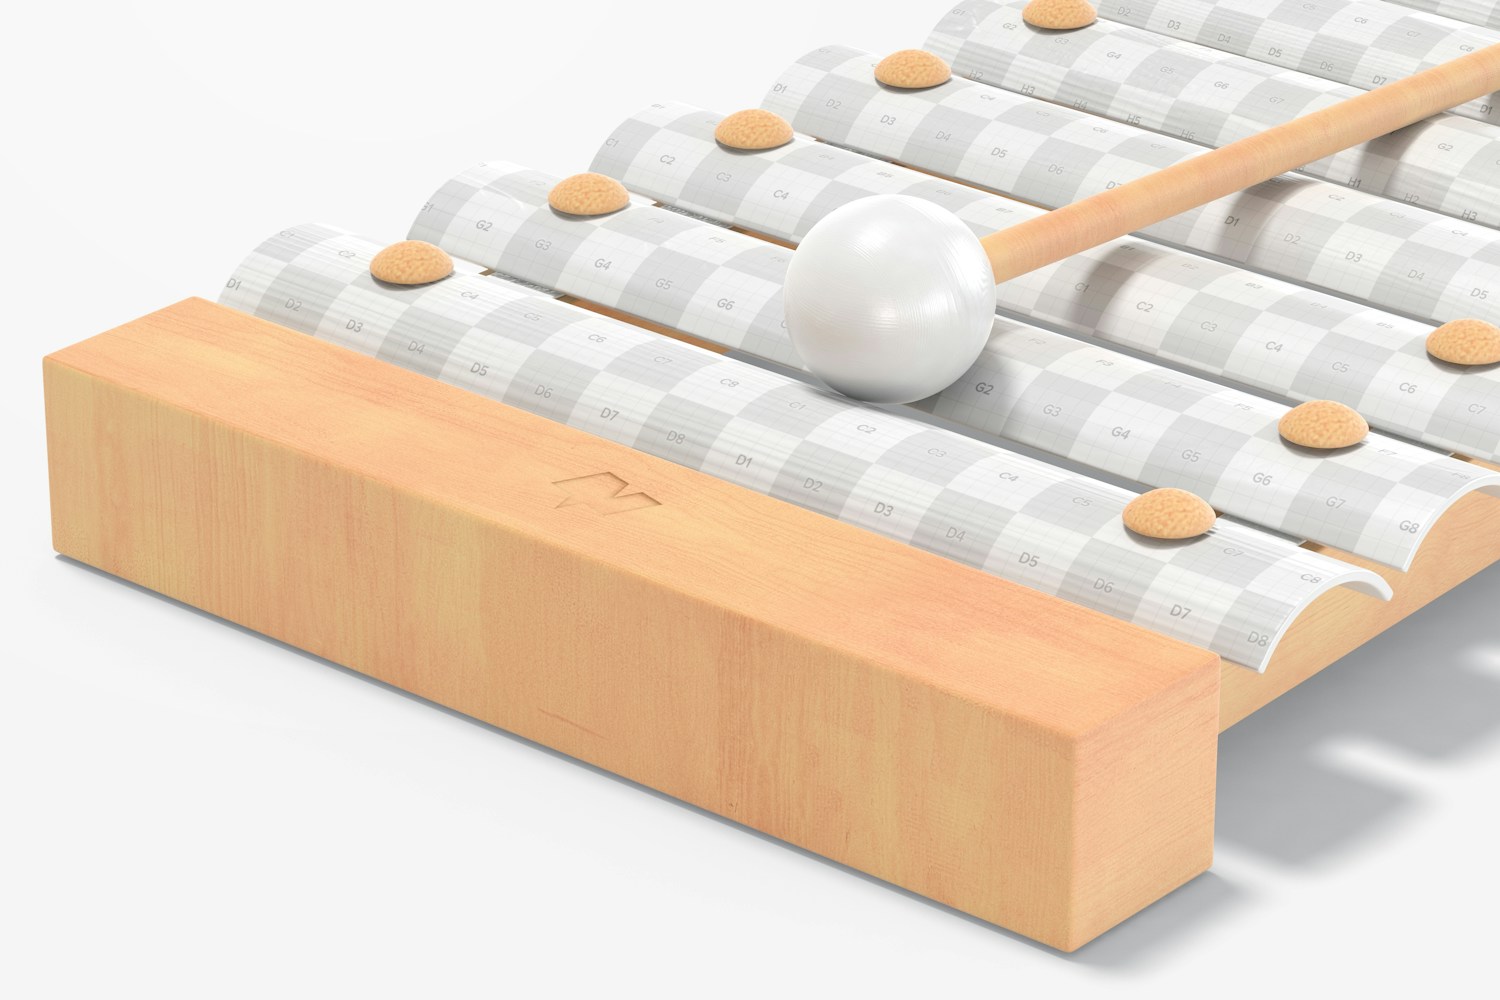 Baby Wooden Xylophone Mockup, Close Up